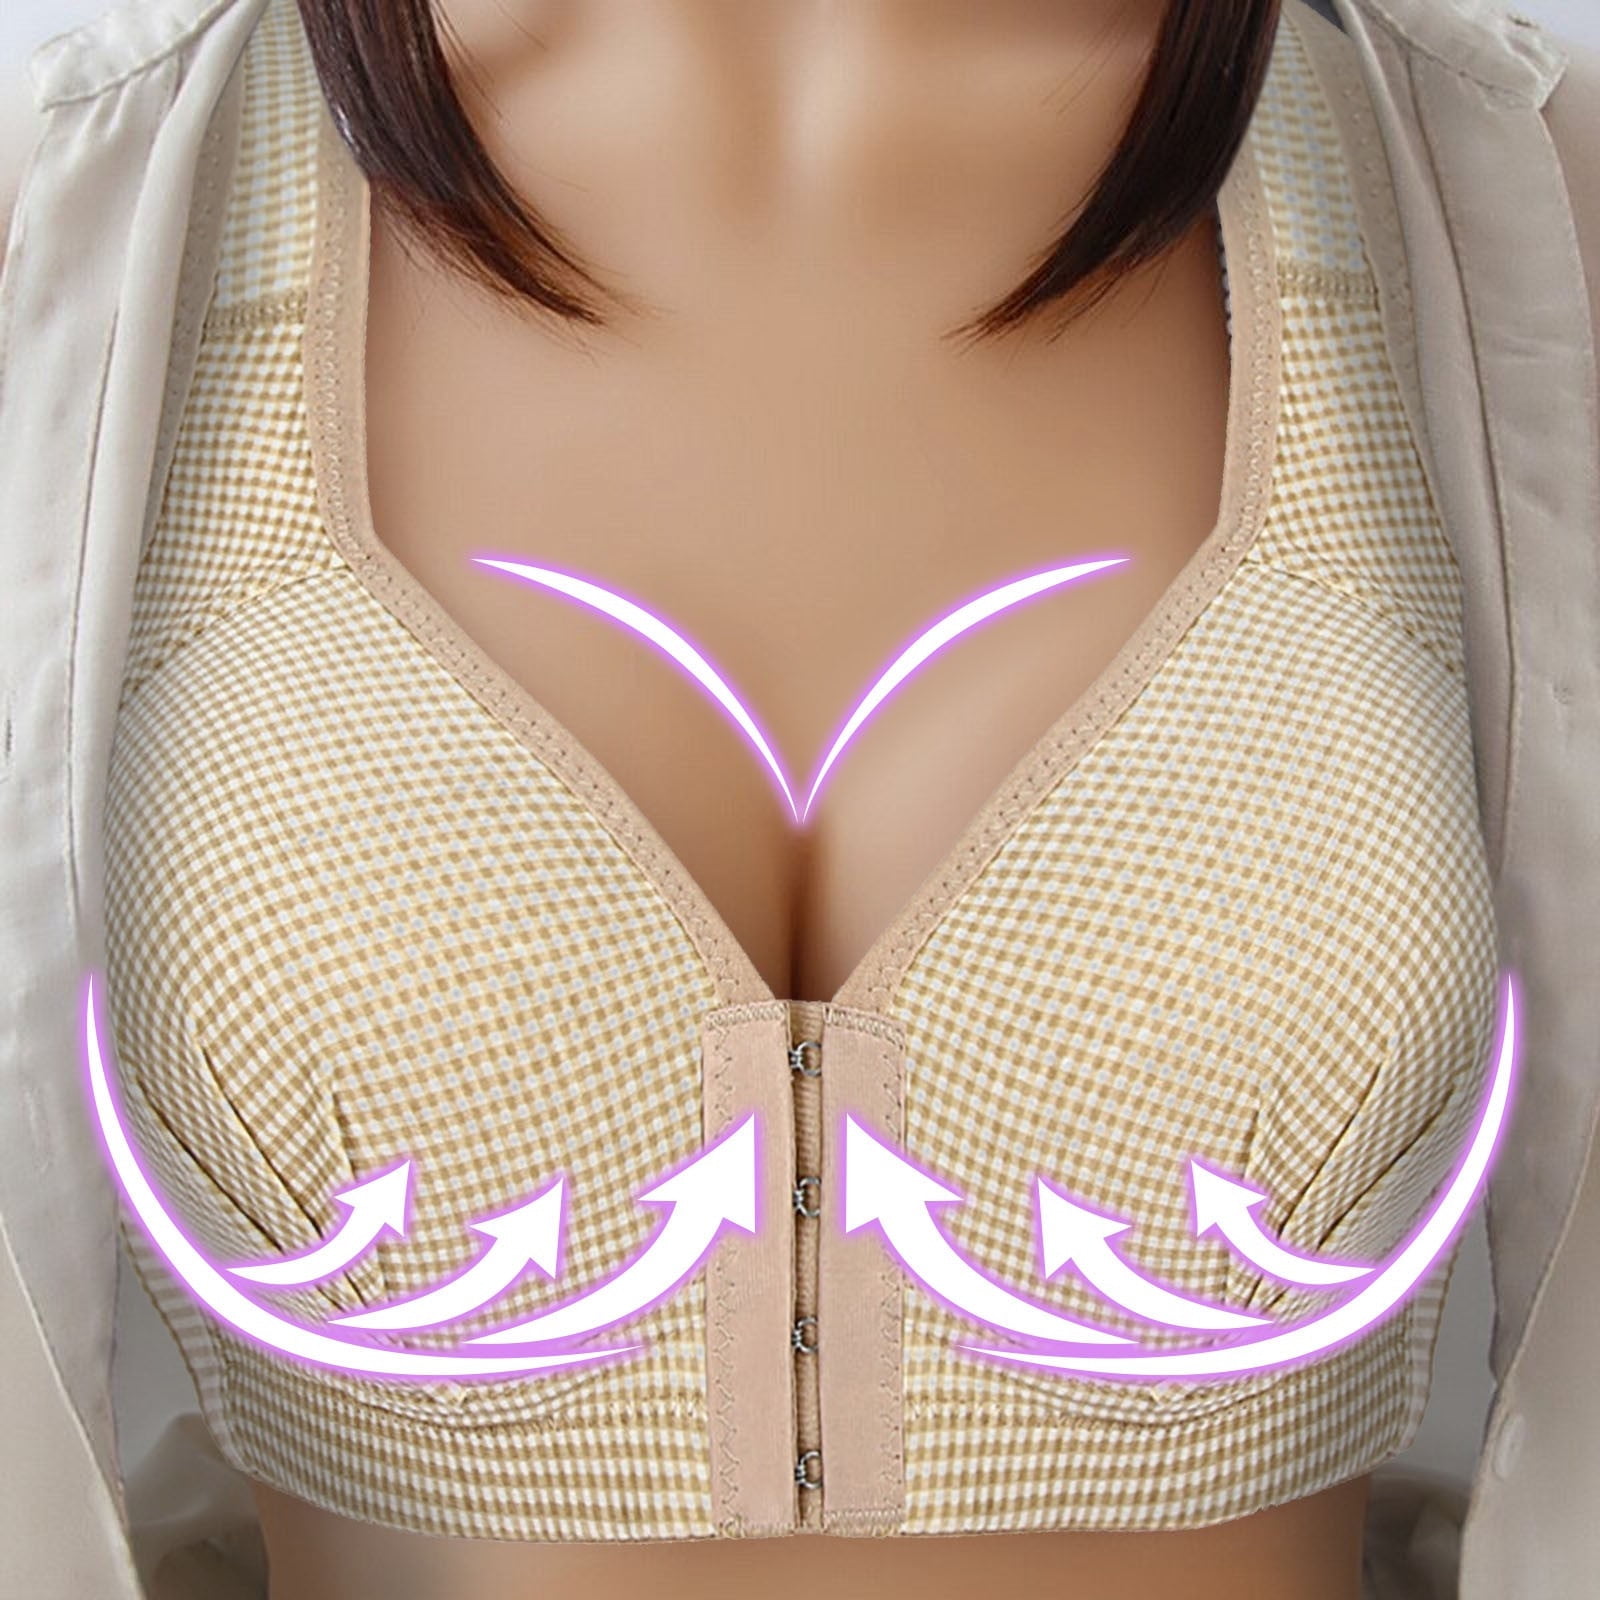 Women's Full Coverage Front Closure Wire Back Support Posture Bra Solid  Color Push Up Bra with Support (Beige, S) at  Women's Clothing store